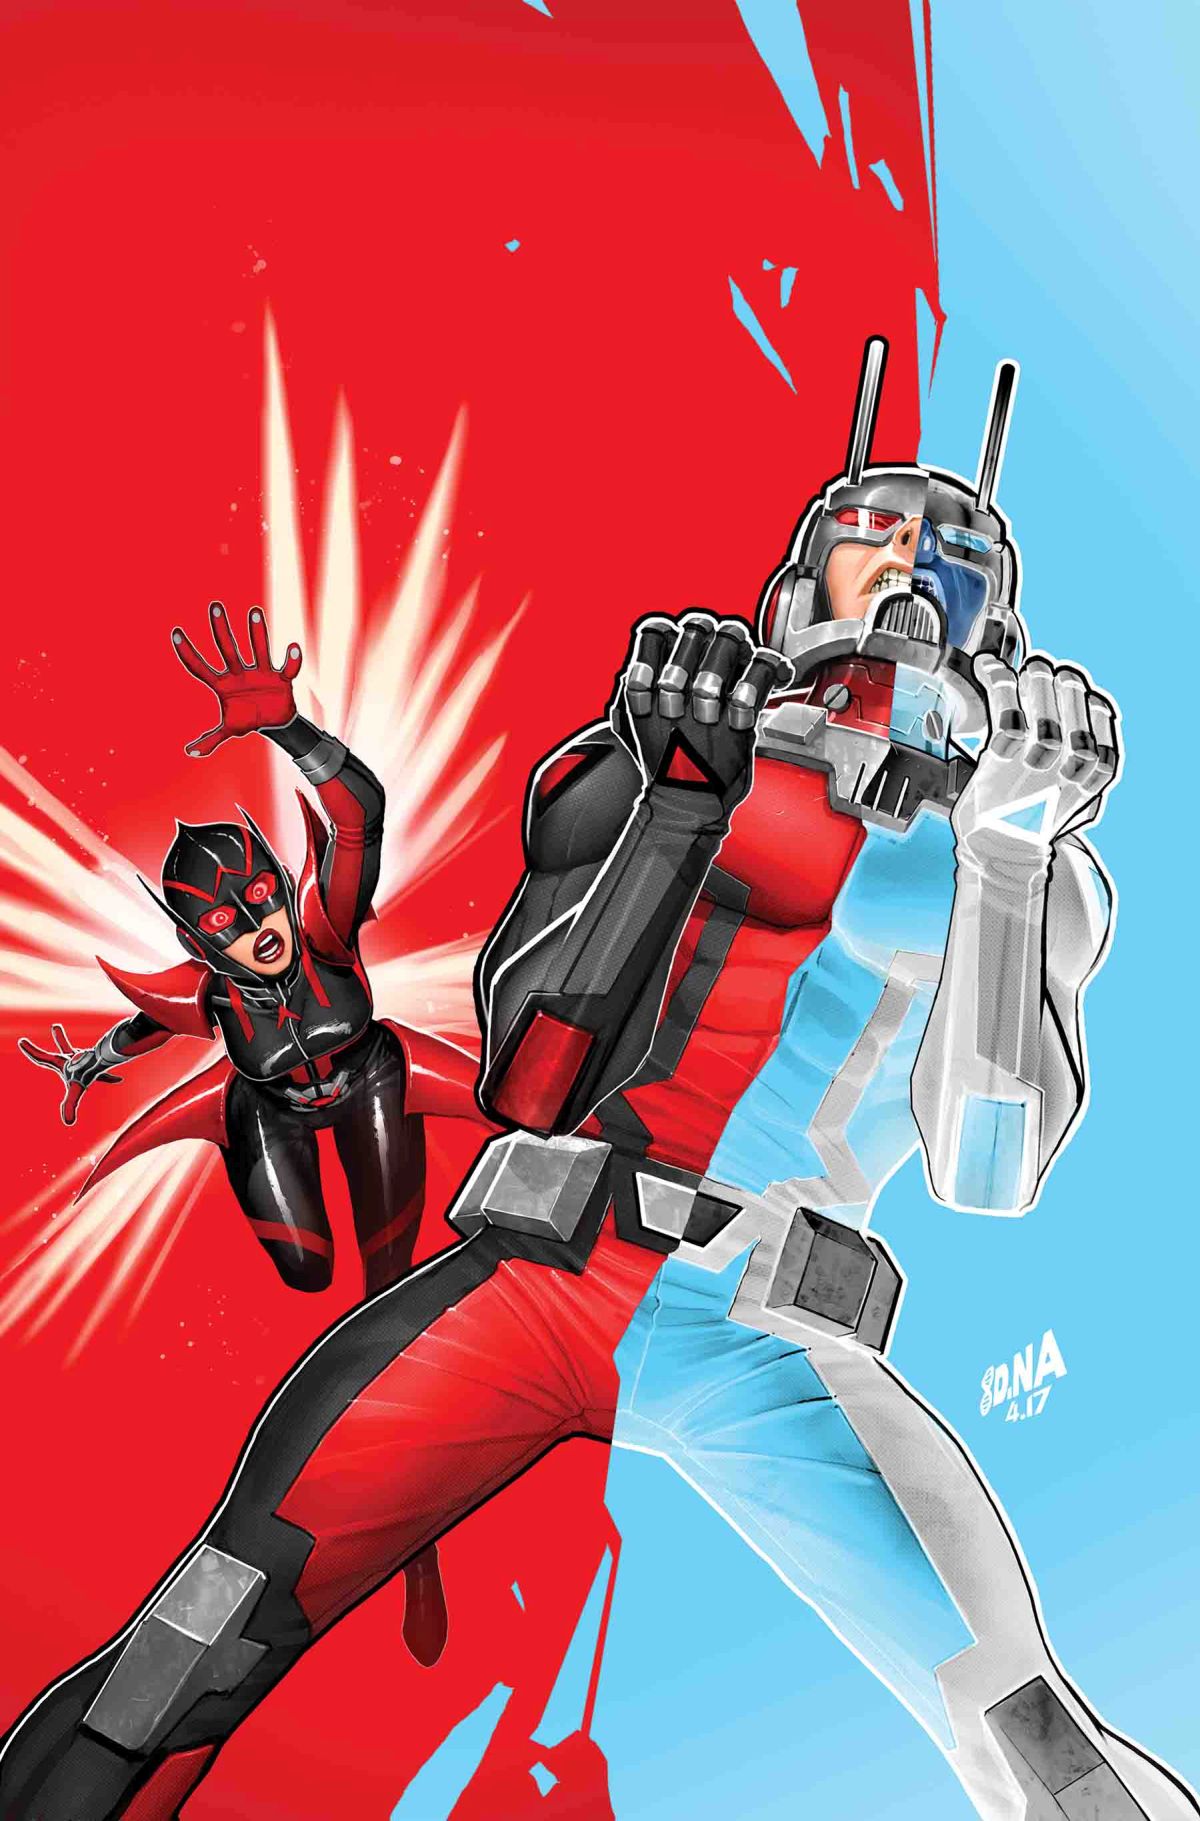 ANT-MAN & THE WASP #4 (of 5) 